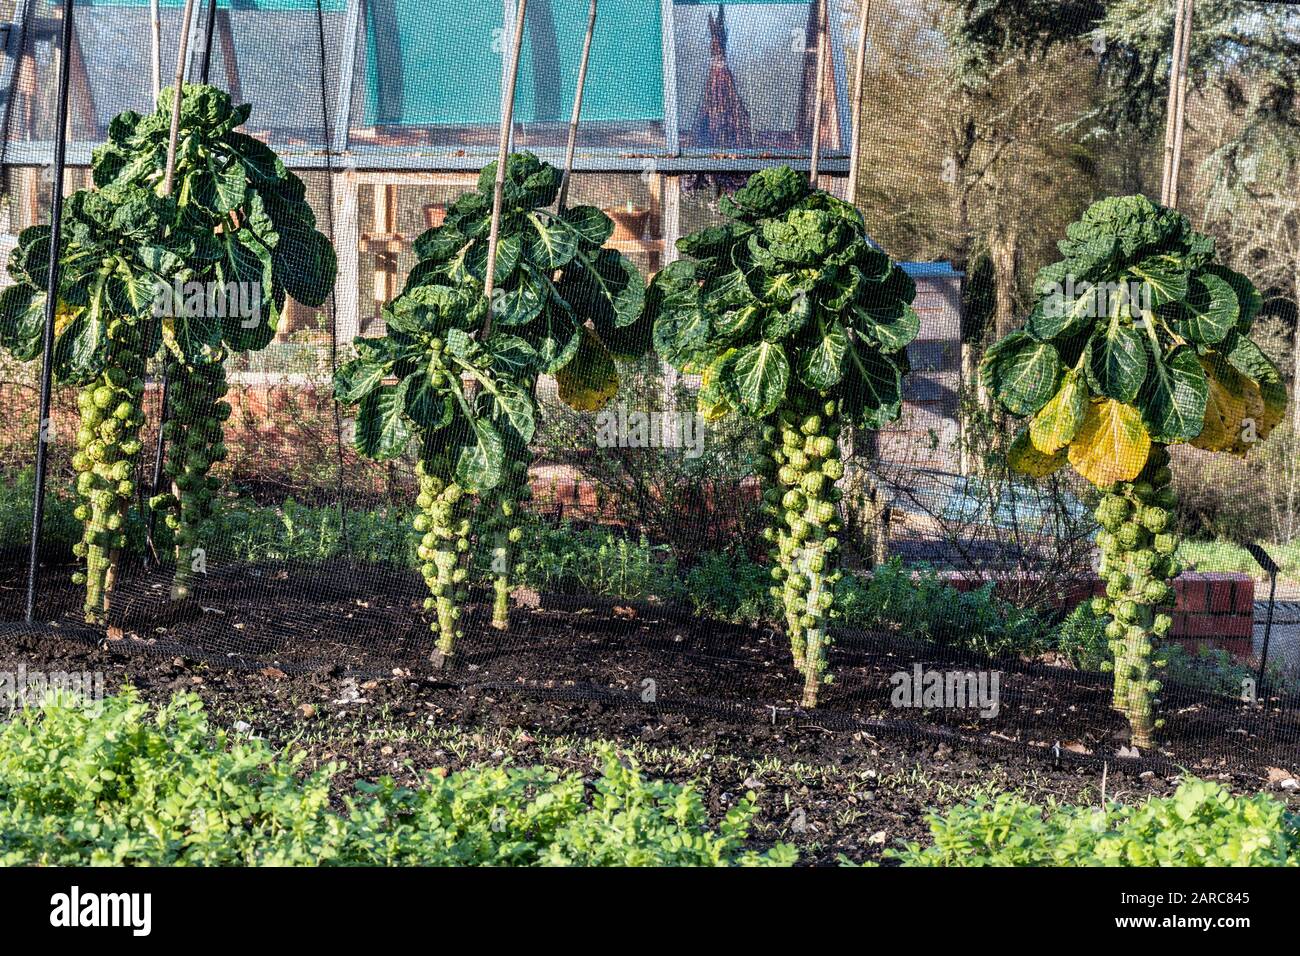 BRUSSEL SPROUTS Kitchen garden winter vegetable garden allotment, Brussel Brussels sprouts 'Cascade' under protective cage mesh netting, to protect vegetable crop from pests. Traditional wooden potting greenhouse in background. Allotment kitchen garden vegetable patch Brussels Sprouts plants growing Brassica oleracea (Gemmifera Group)  in late winter light growing behind enviromesh insect protection mesh It is a member of the Gemmifera Group of cabbages, grown for its edible buds A stalwart among winter vegetables in cool temperate climates Grown under insect-proof mesh or horticultural fleece Stock Photo